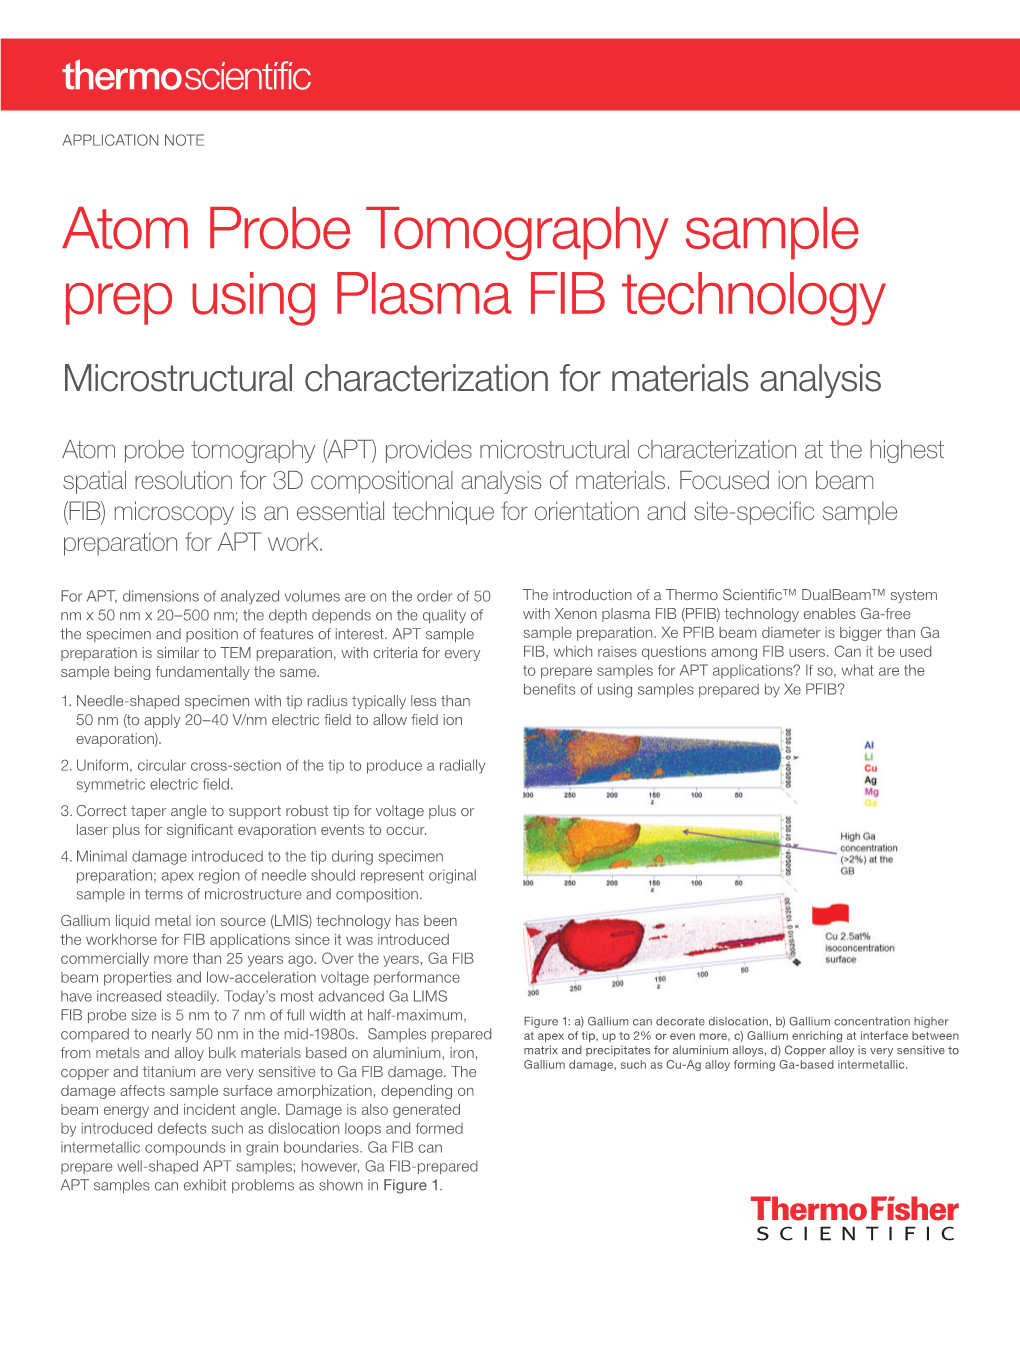 Atom Probe Tomography Sample Prep Using Plasma FIB Technology Microstructural Characterization for Materials Analysis